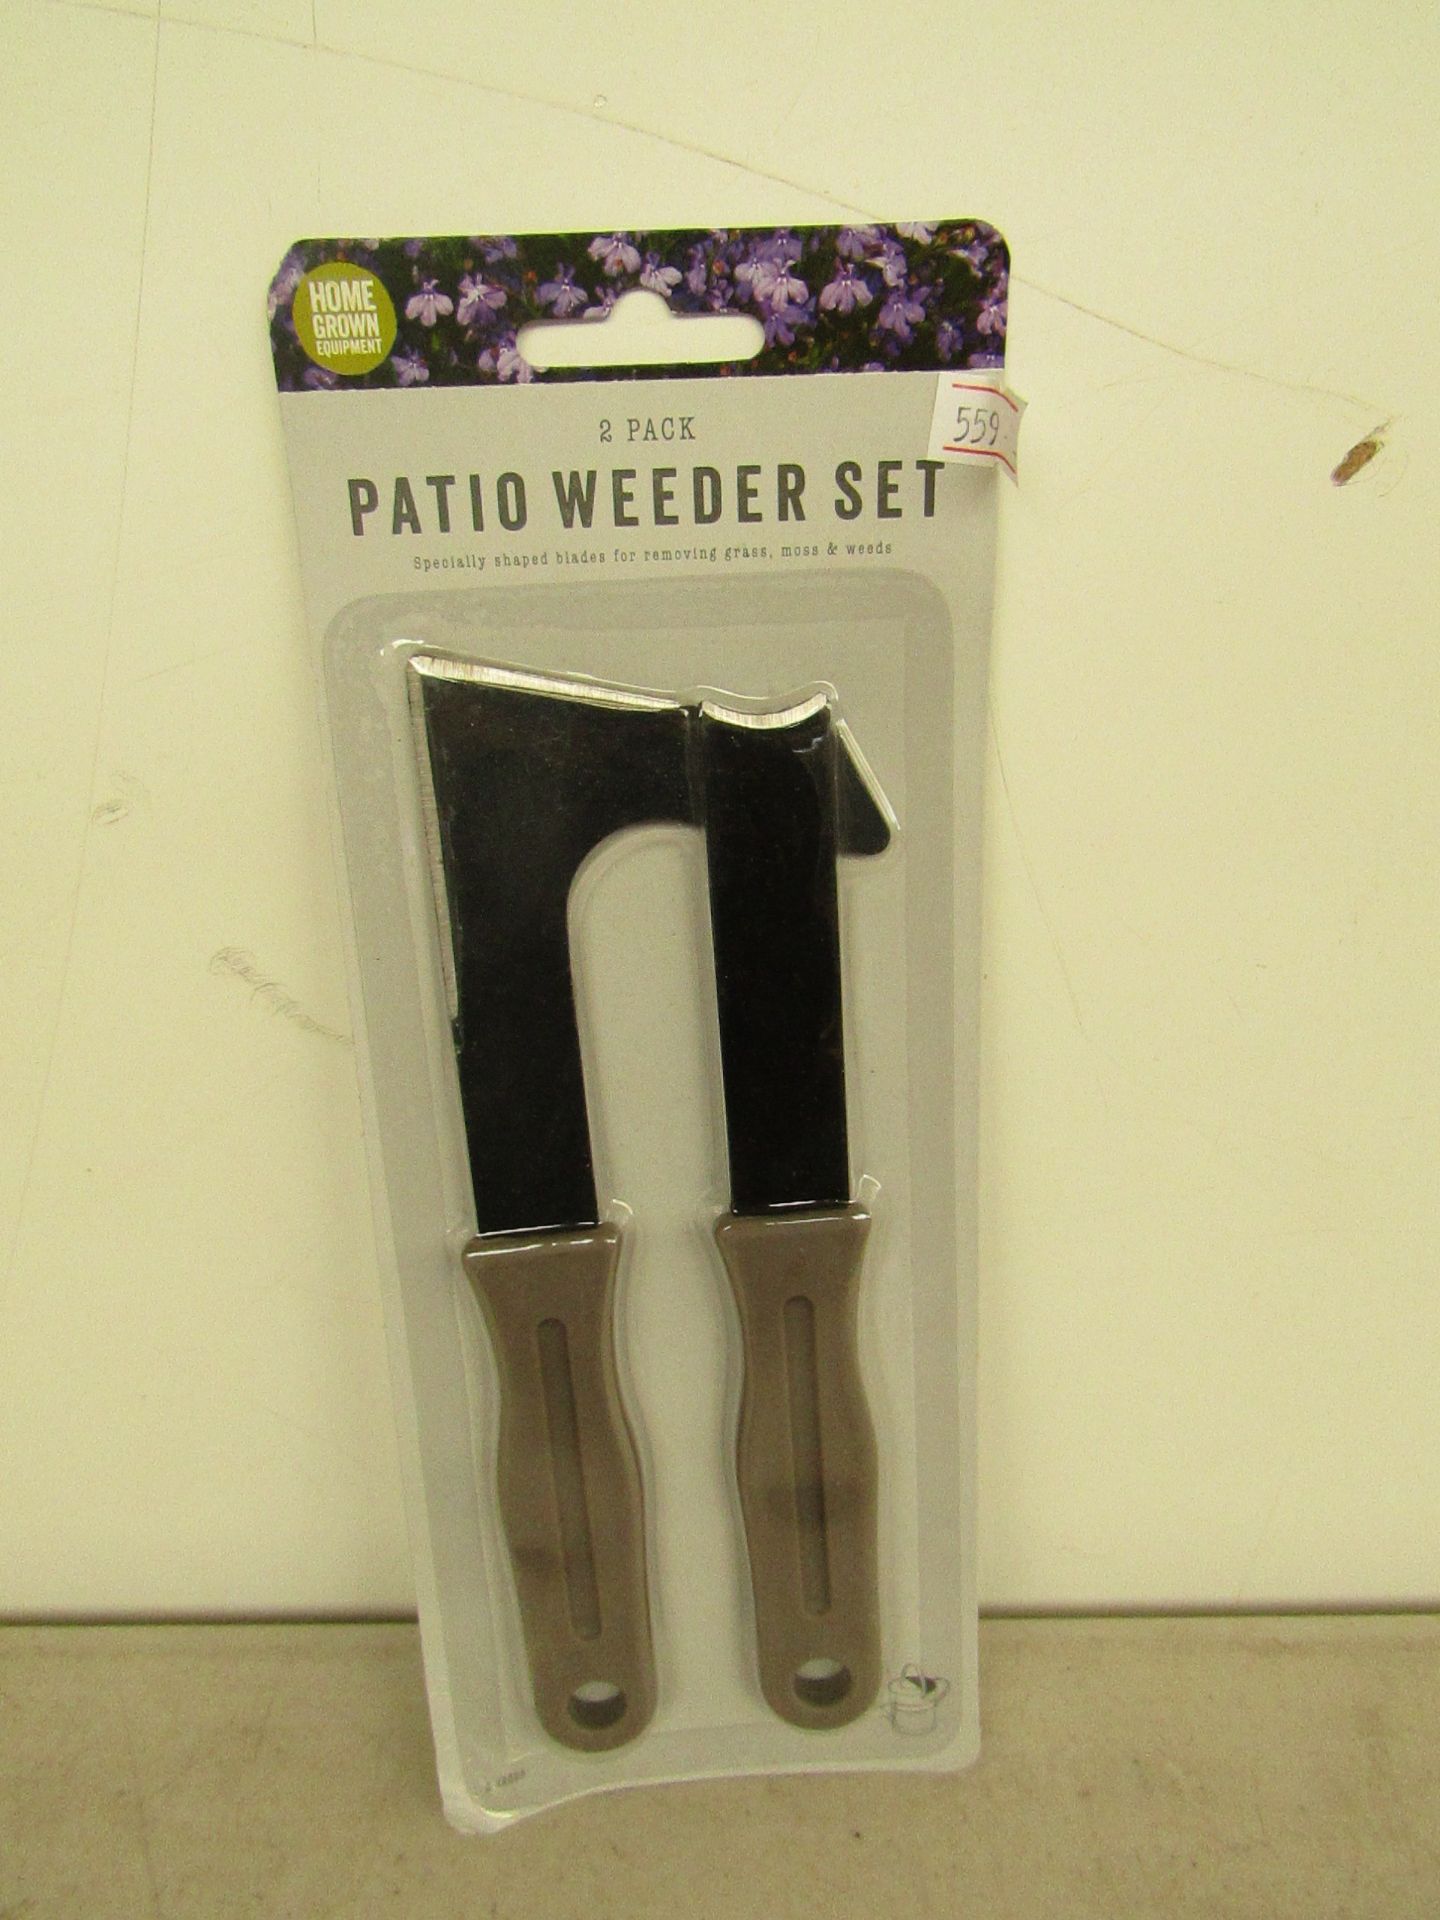 4x Patio weeder set, all new and packaged.